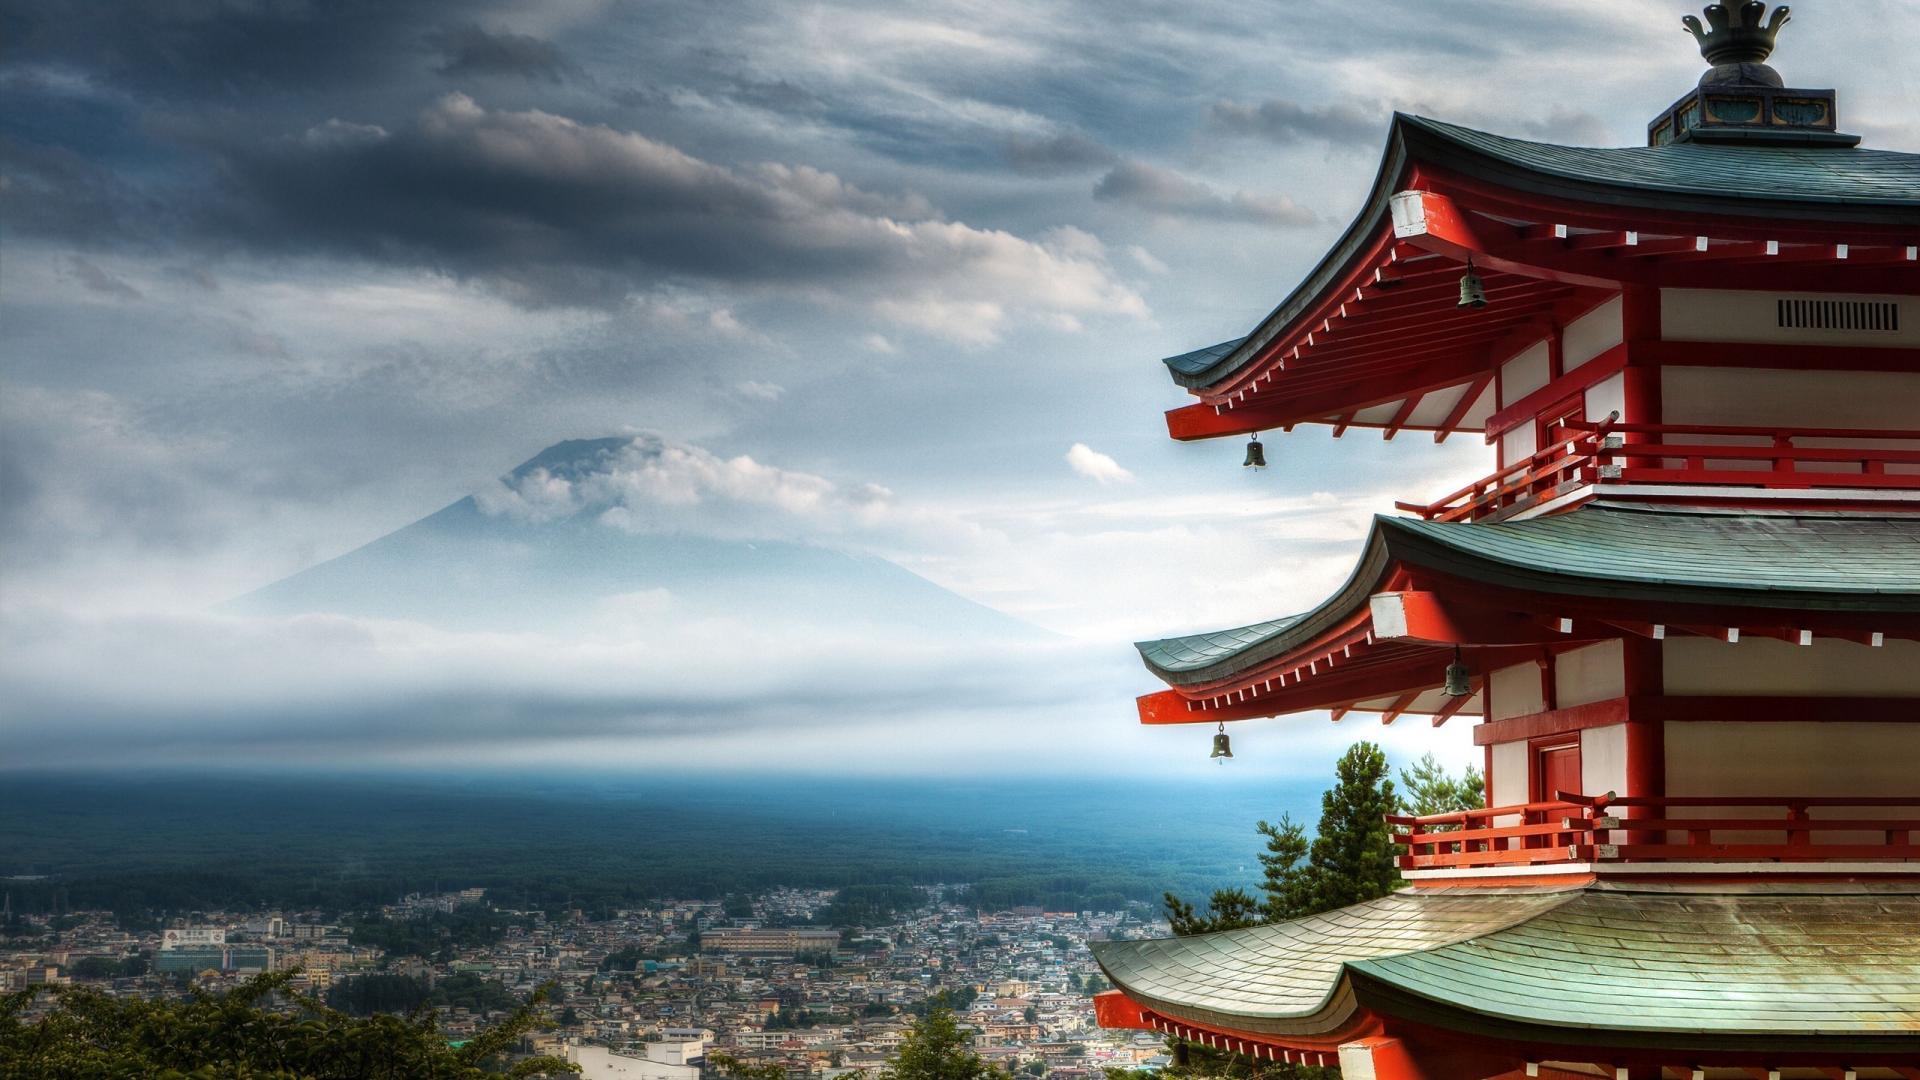 Pagoda Photos Download The BEST Free Pagoda Stock Photos  HD Images